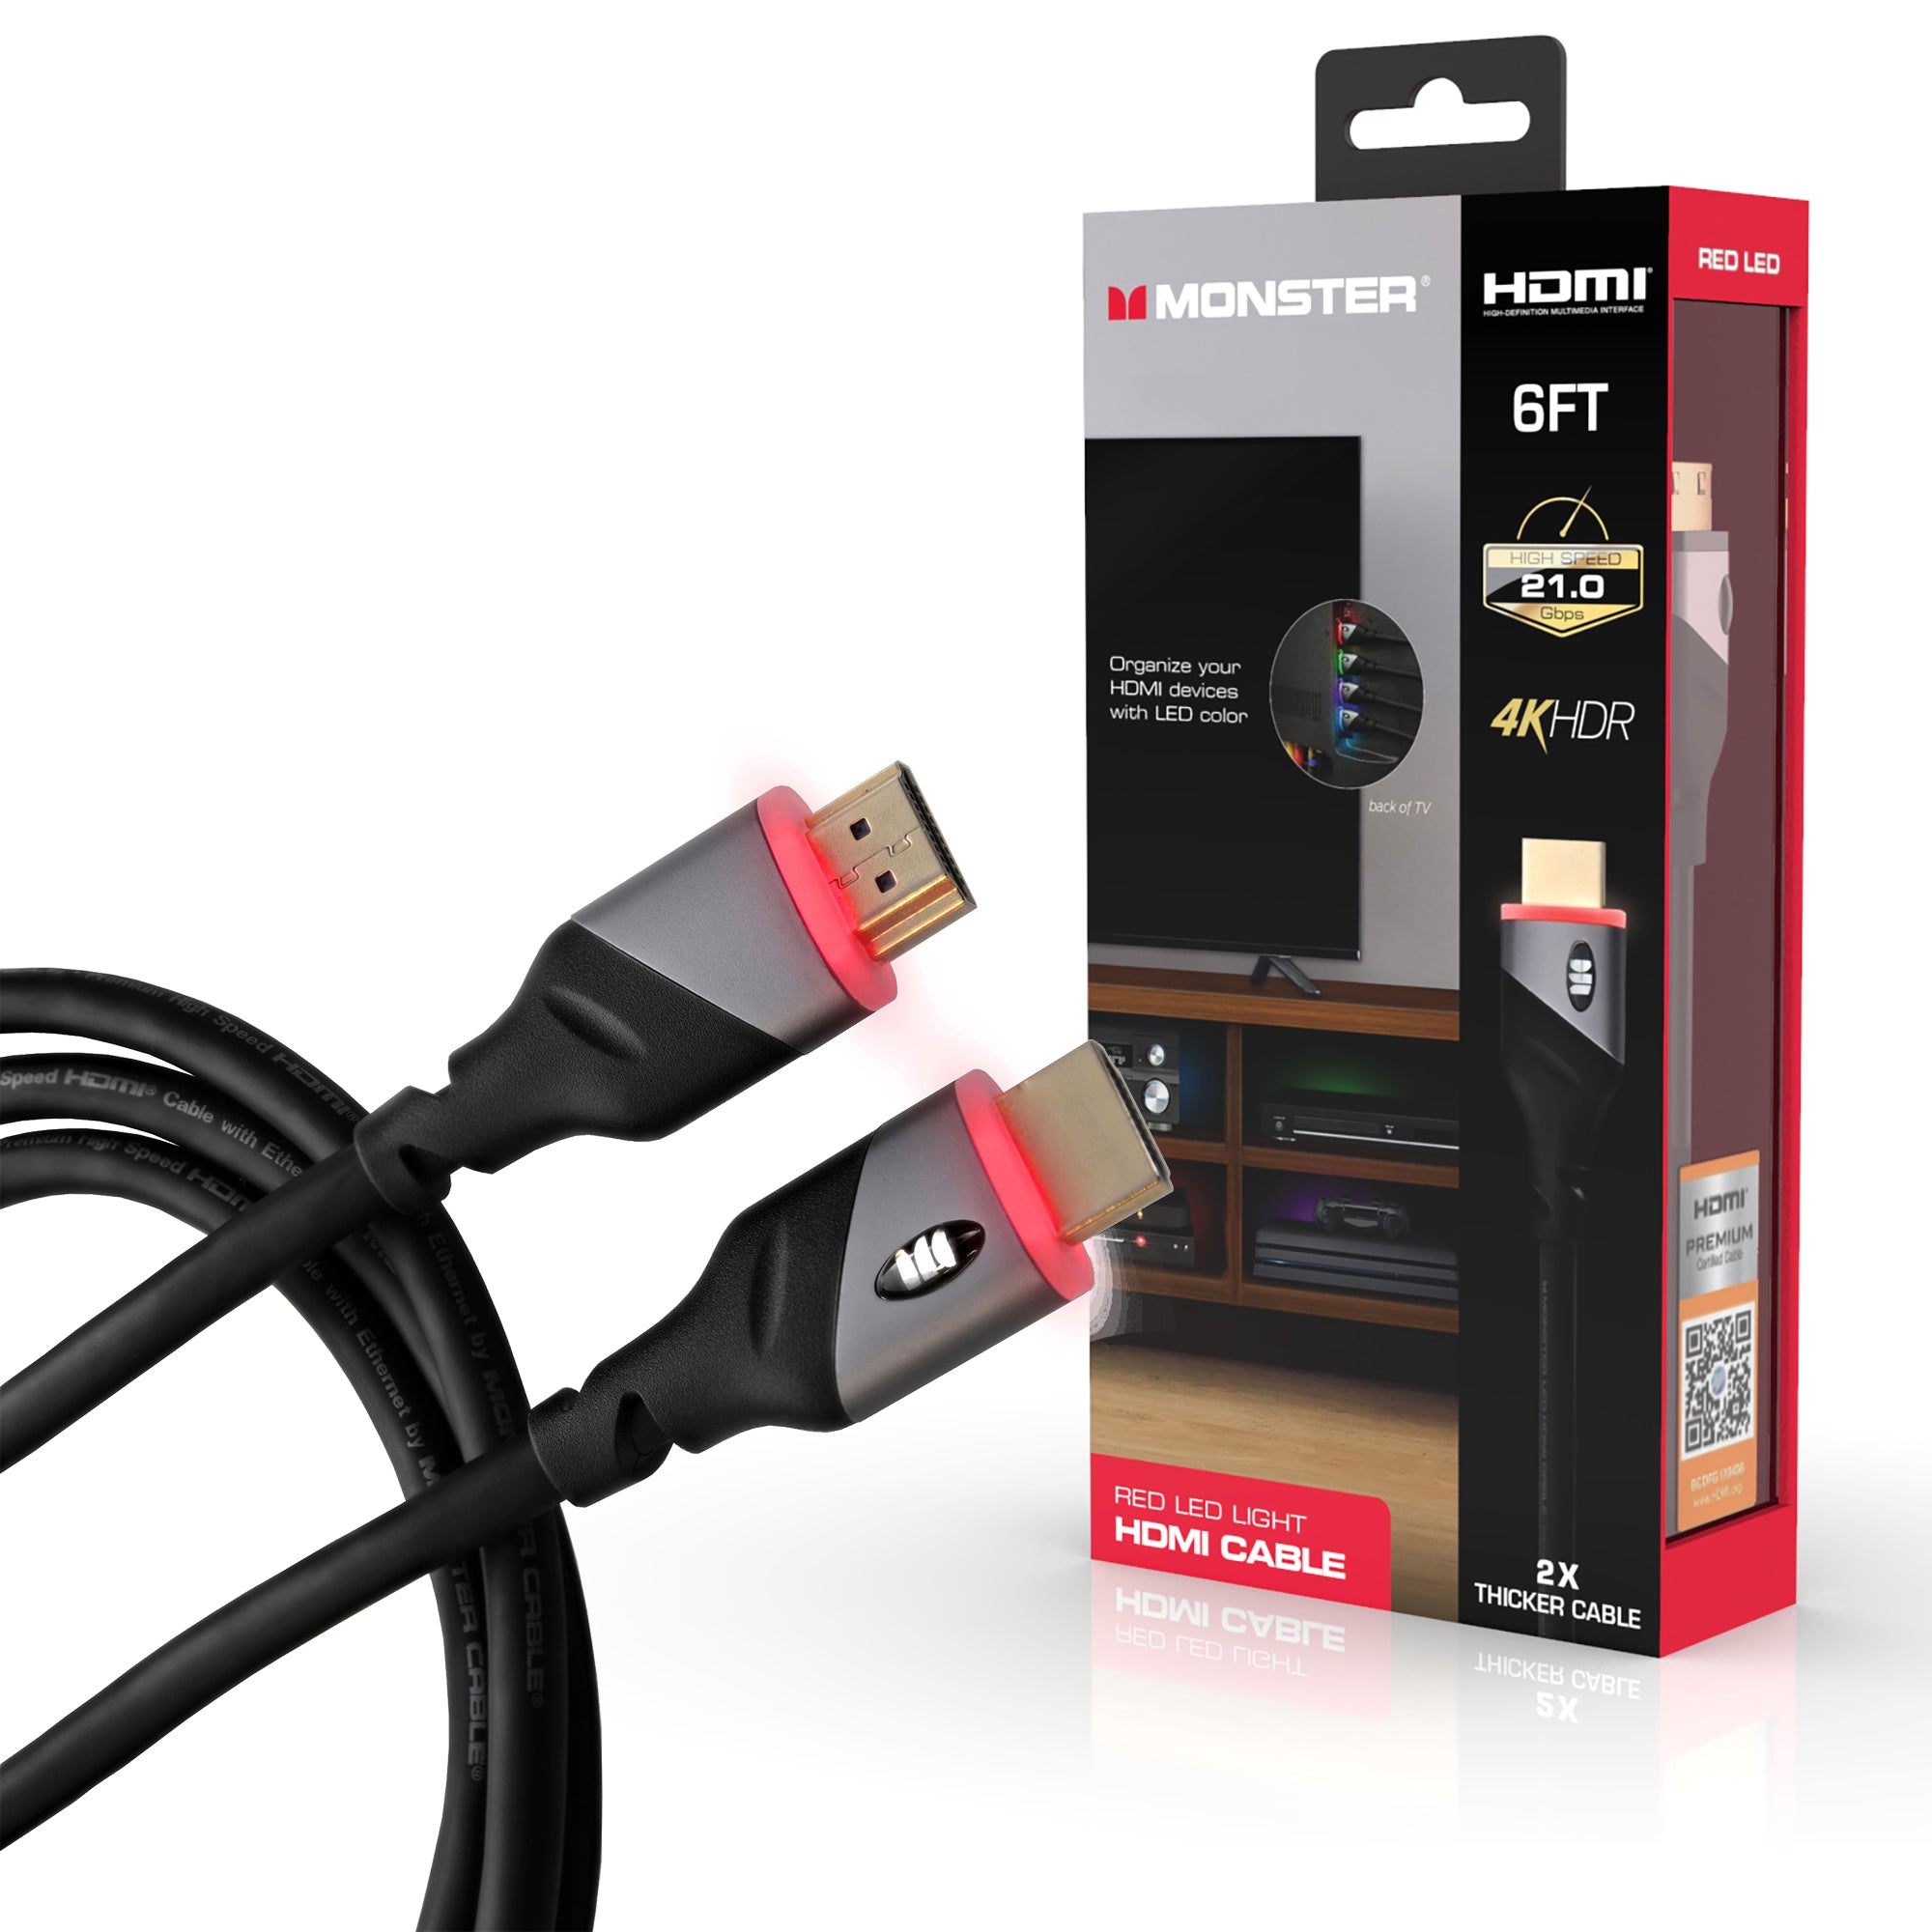 Monster 4K LED HDMI Cable 6FT